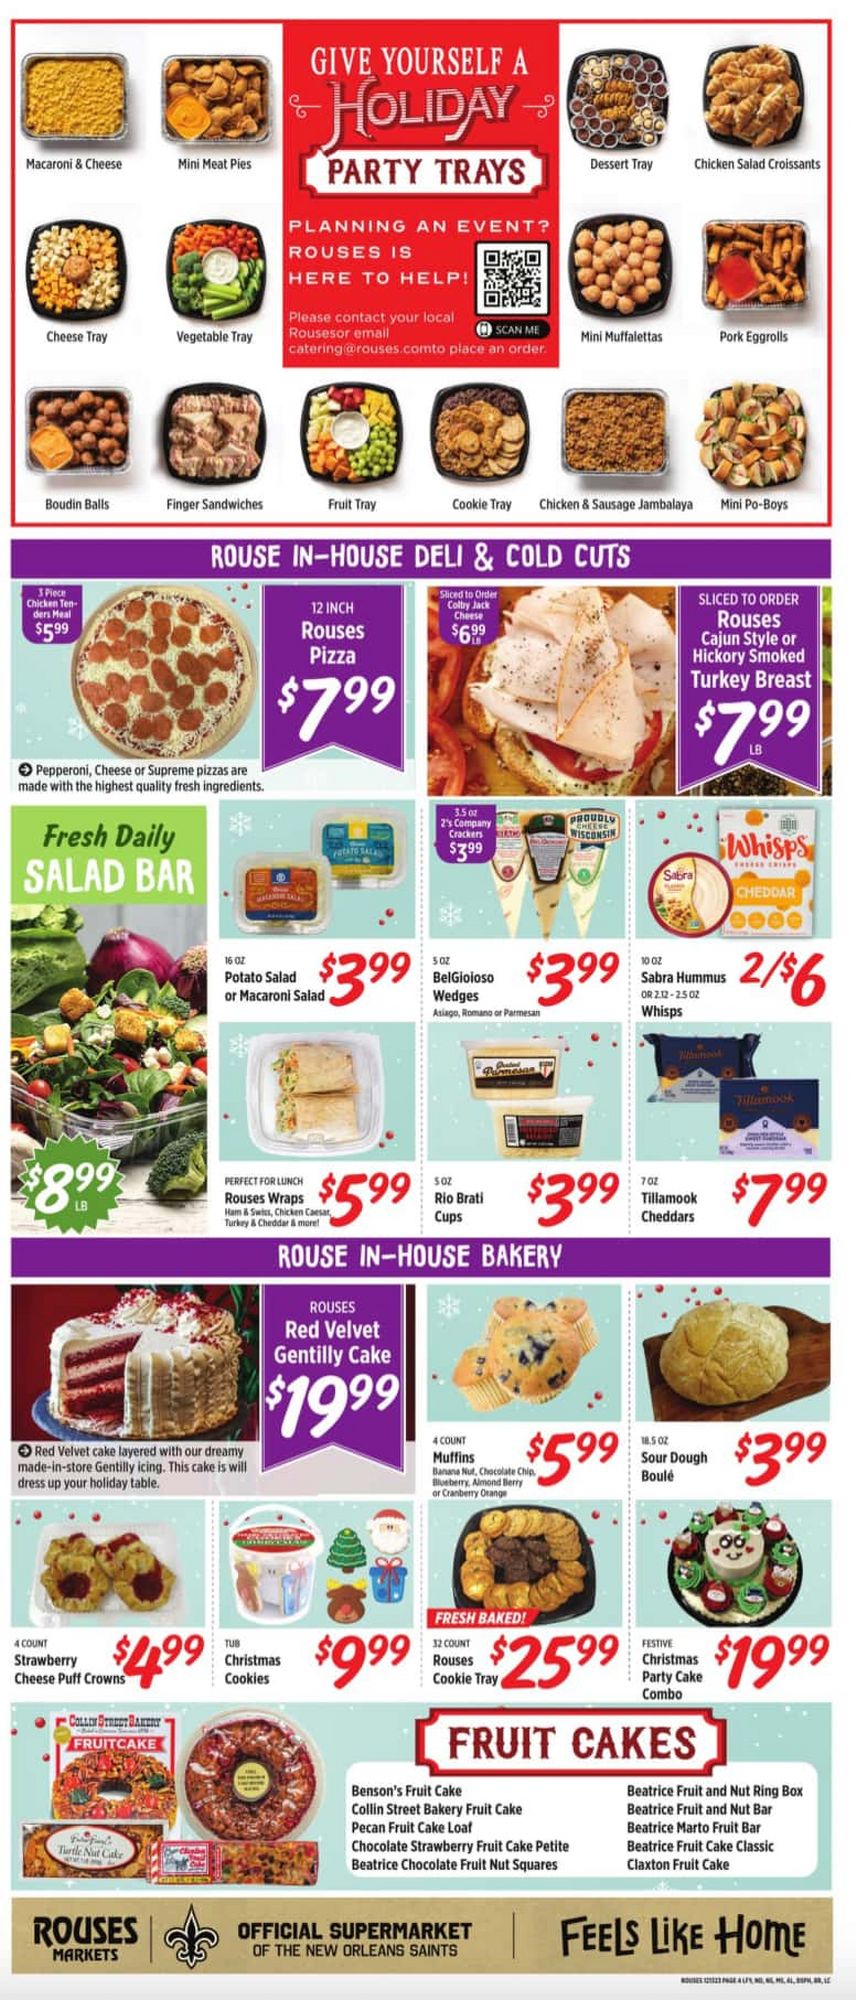 Rouses Christmas July 2024 Weekly Sales, Deals, Discounts and Digital Coupons.